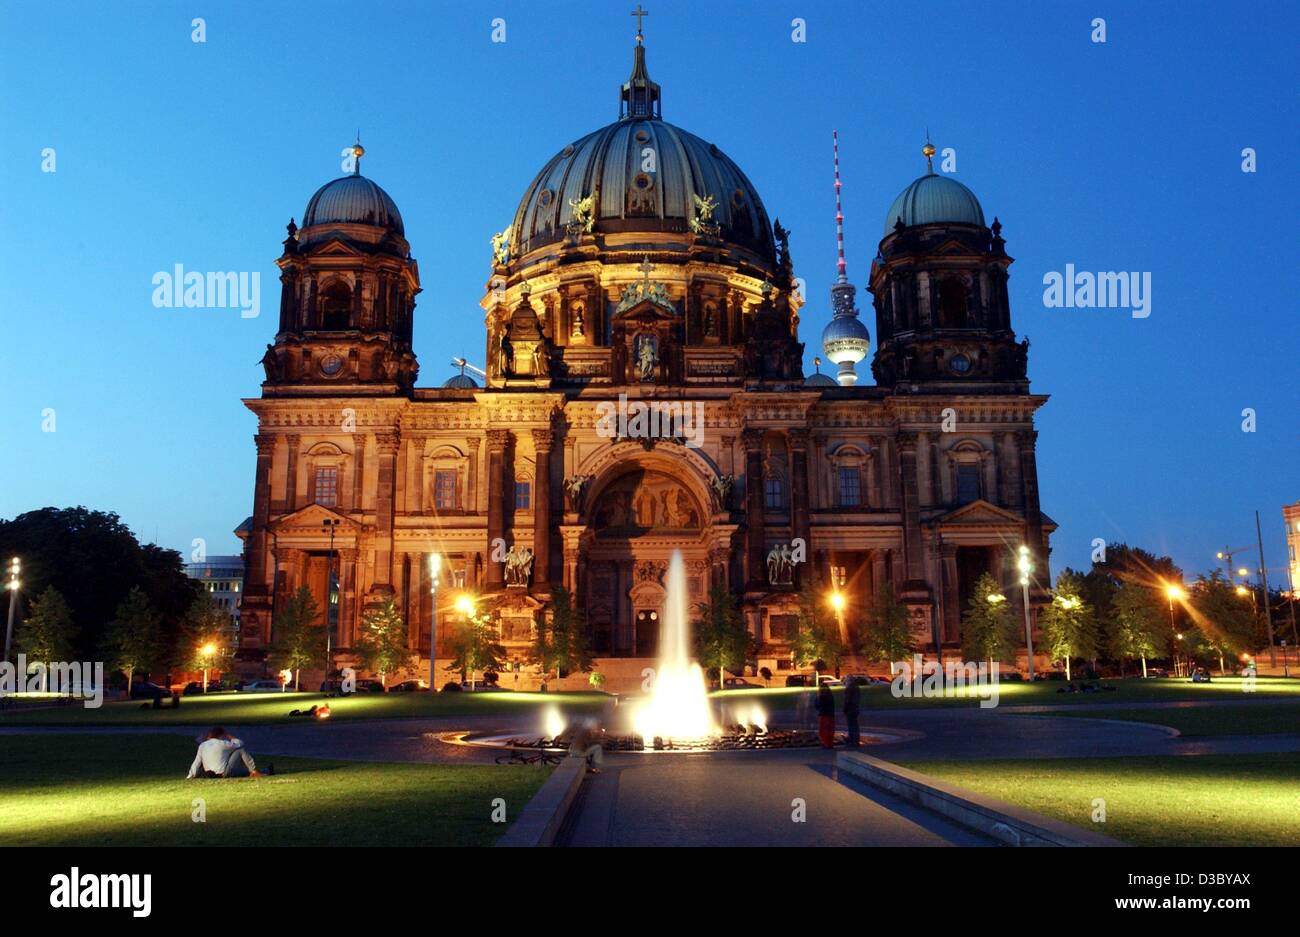 (dpa) - A view of the illuminated Cathedral in Berlin, Germany, 30 June 2003.  It is the former court cathedral of Prussia's royal Hohenzollern family, who ruled the region of the Kurmark Brandenburg from 1412 to 1918 and who reigned from 1871 as German emperors.  Architect Julius Carl Raschdorff bu Stock Photo